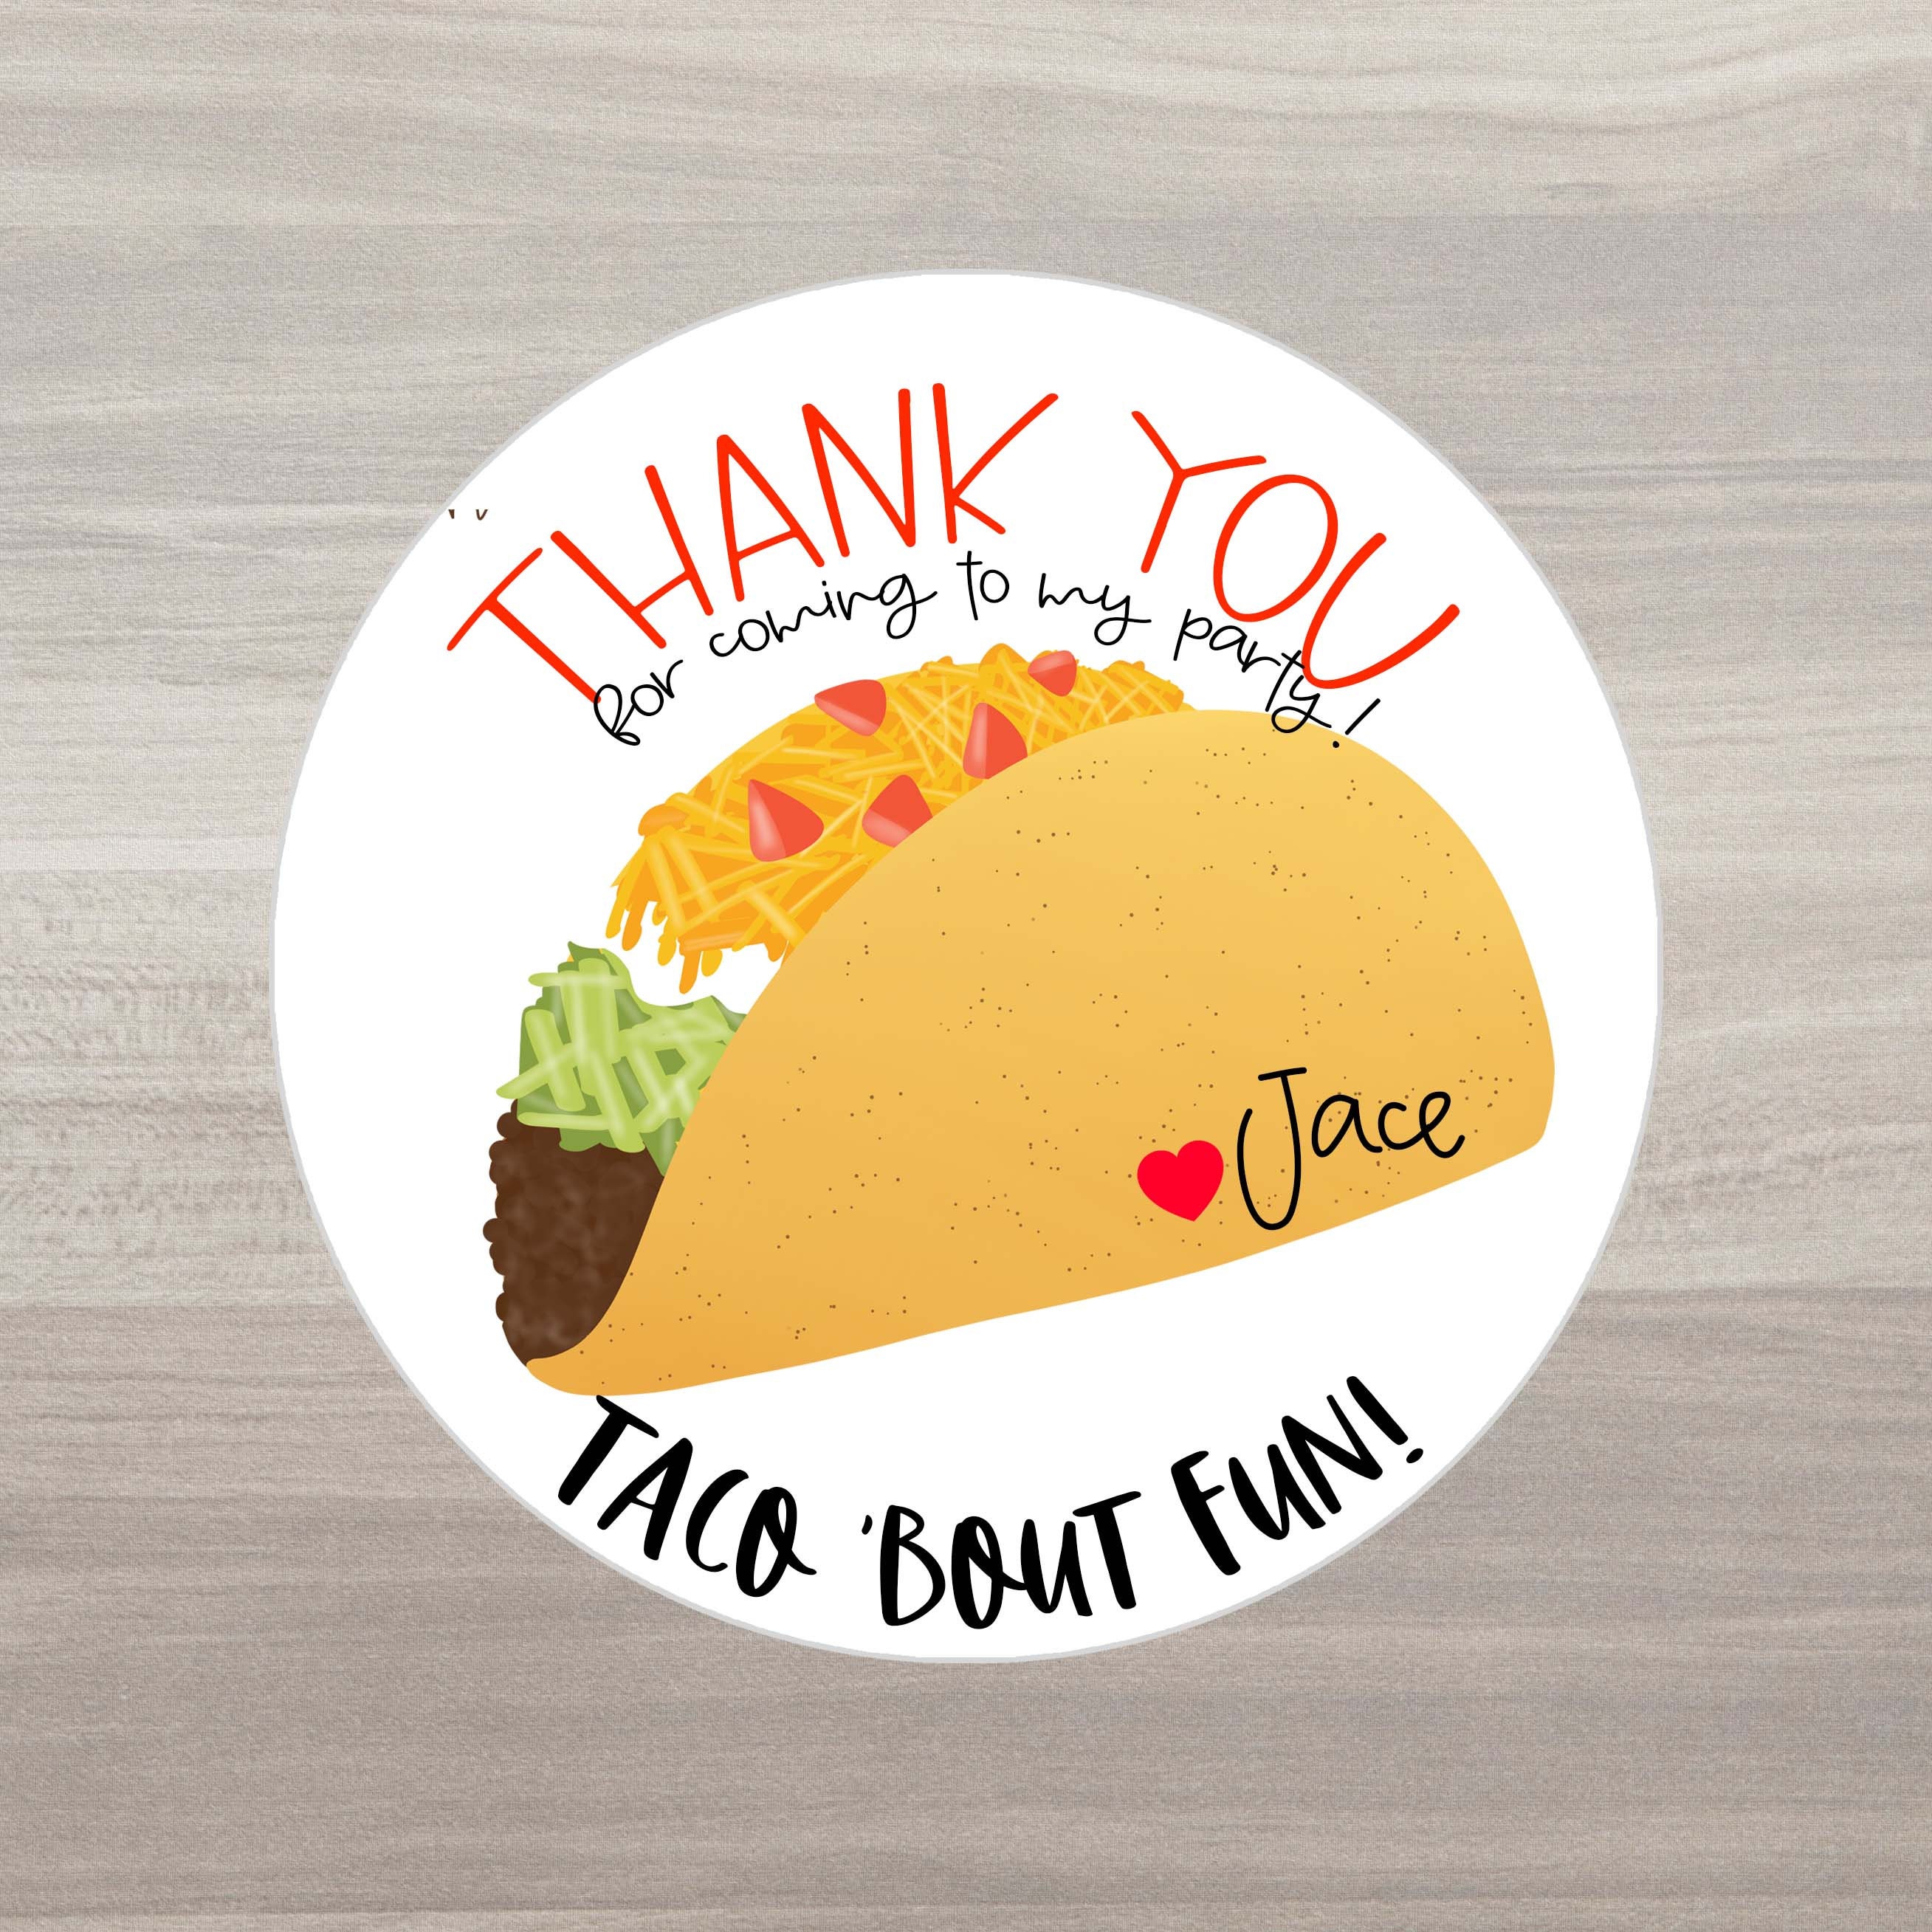 Taco Tuesday Humor Funny Food Inspirational Vinyl Sticker | Gifts Under 5  Dollars